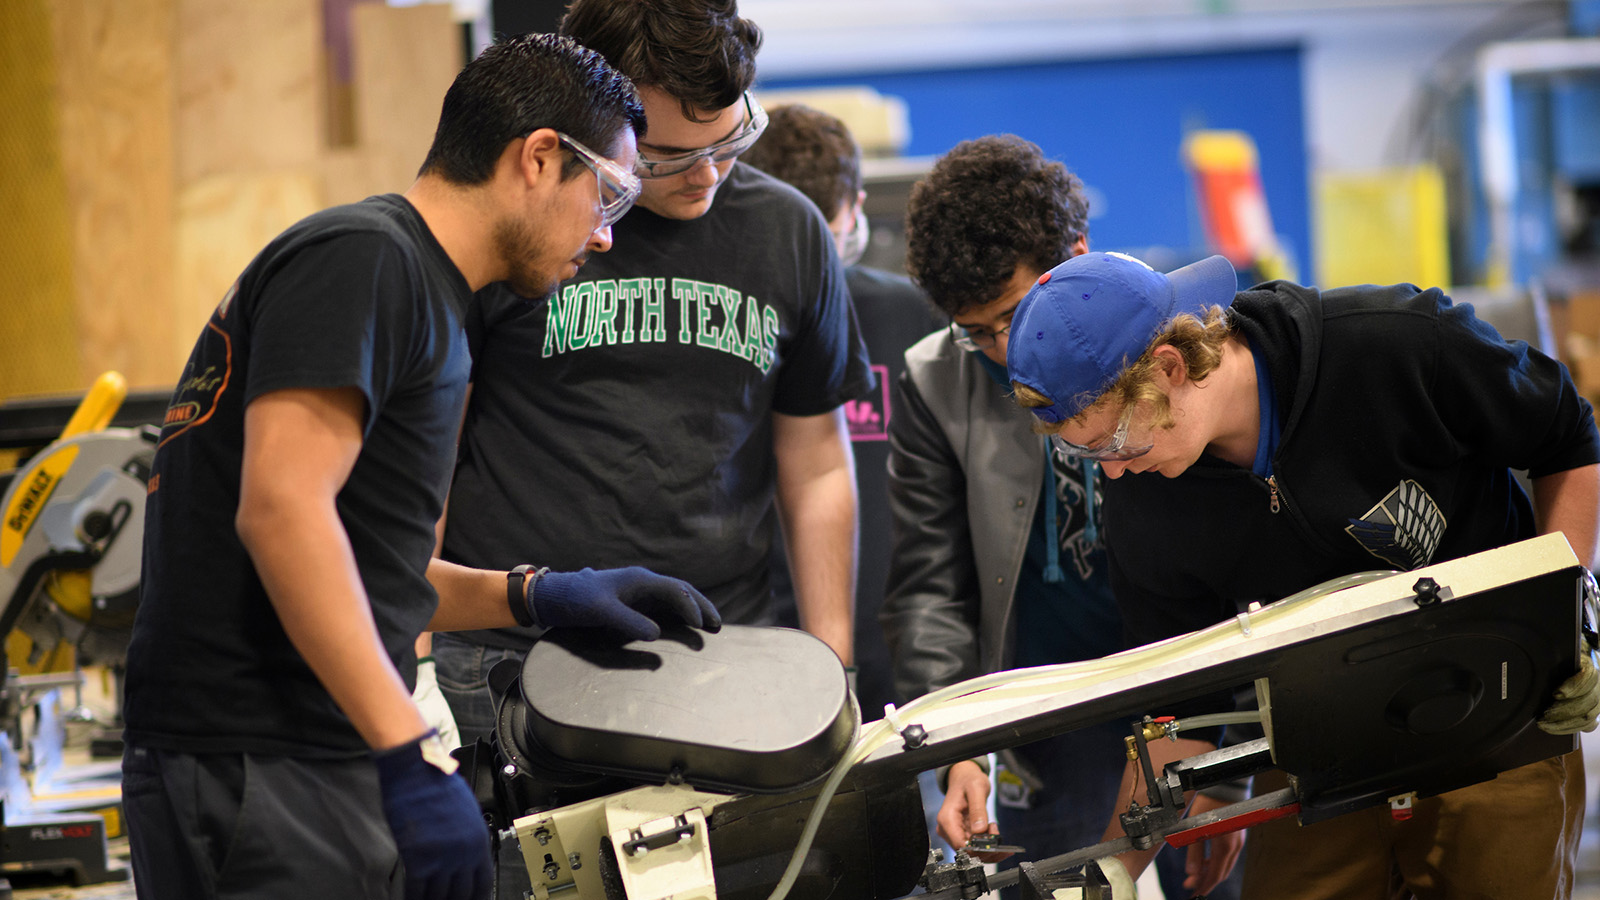 Four UNT students work on their senior design project together